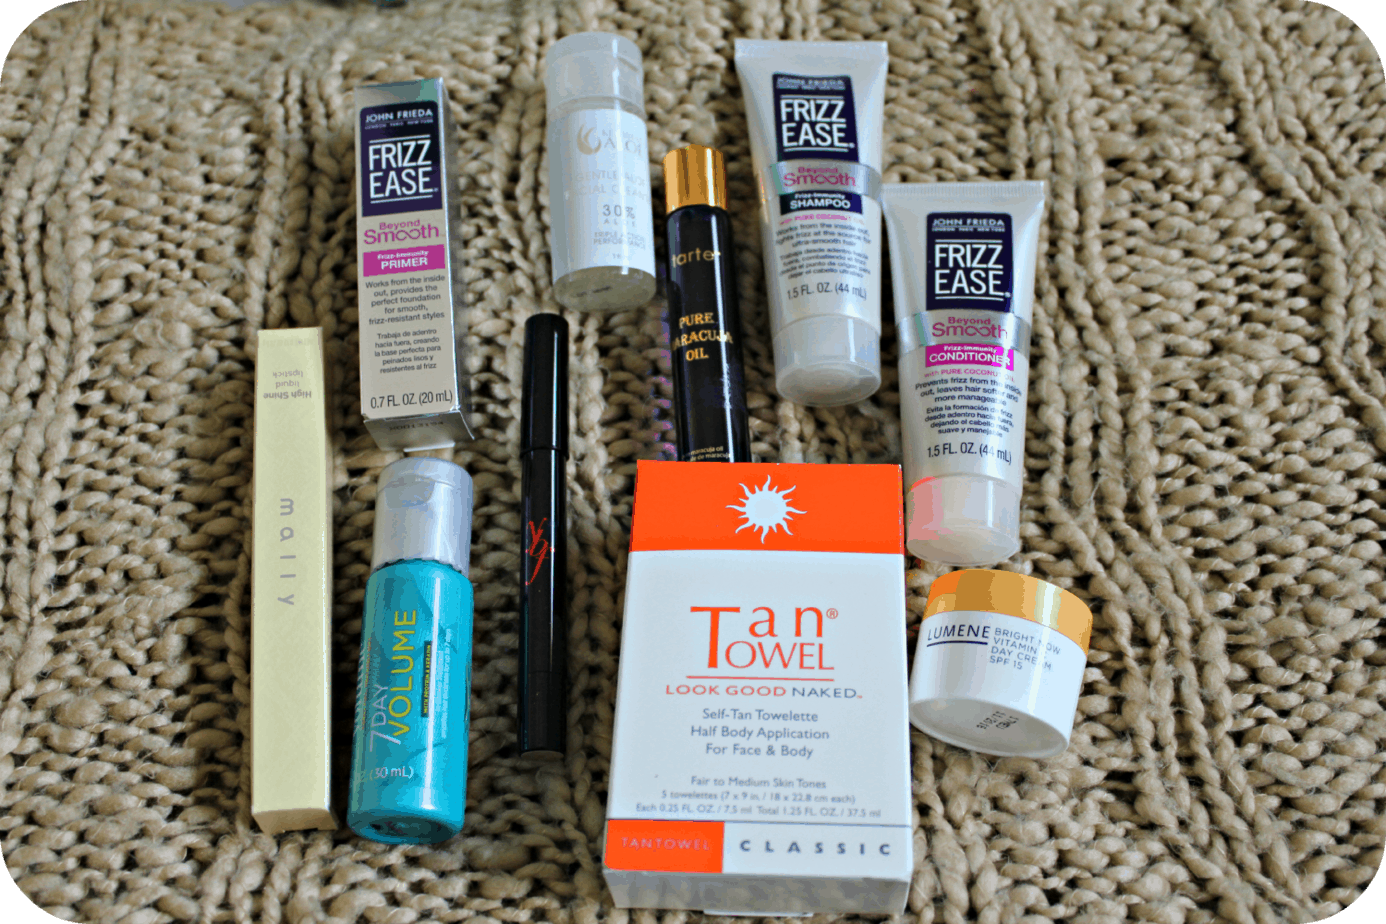 New Beauty Testtube Contents for March